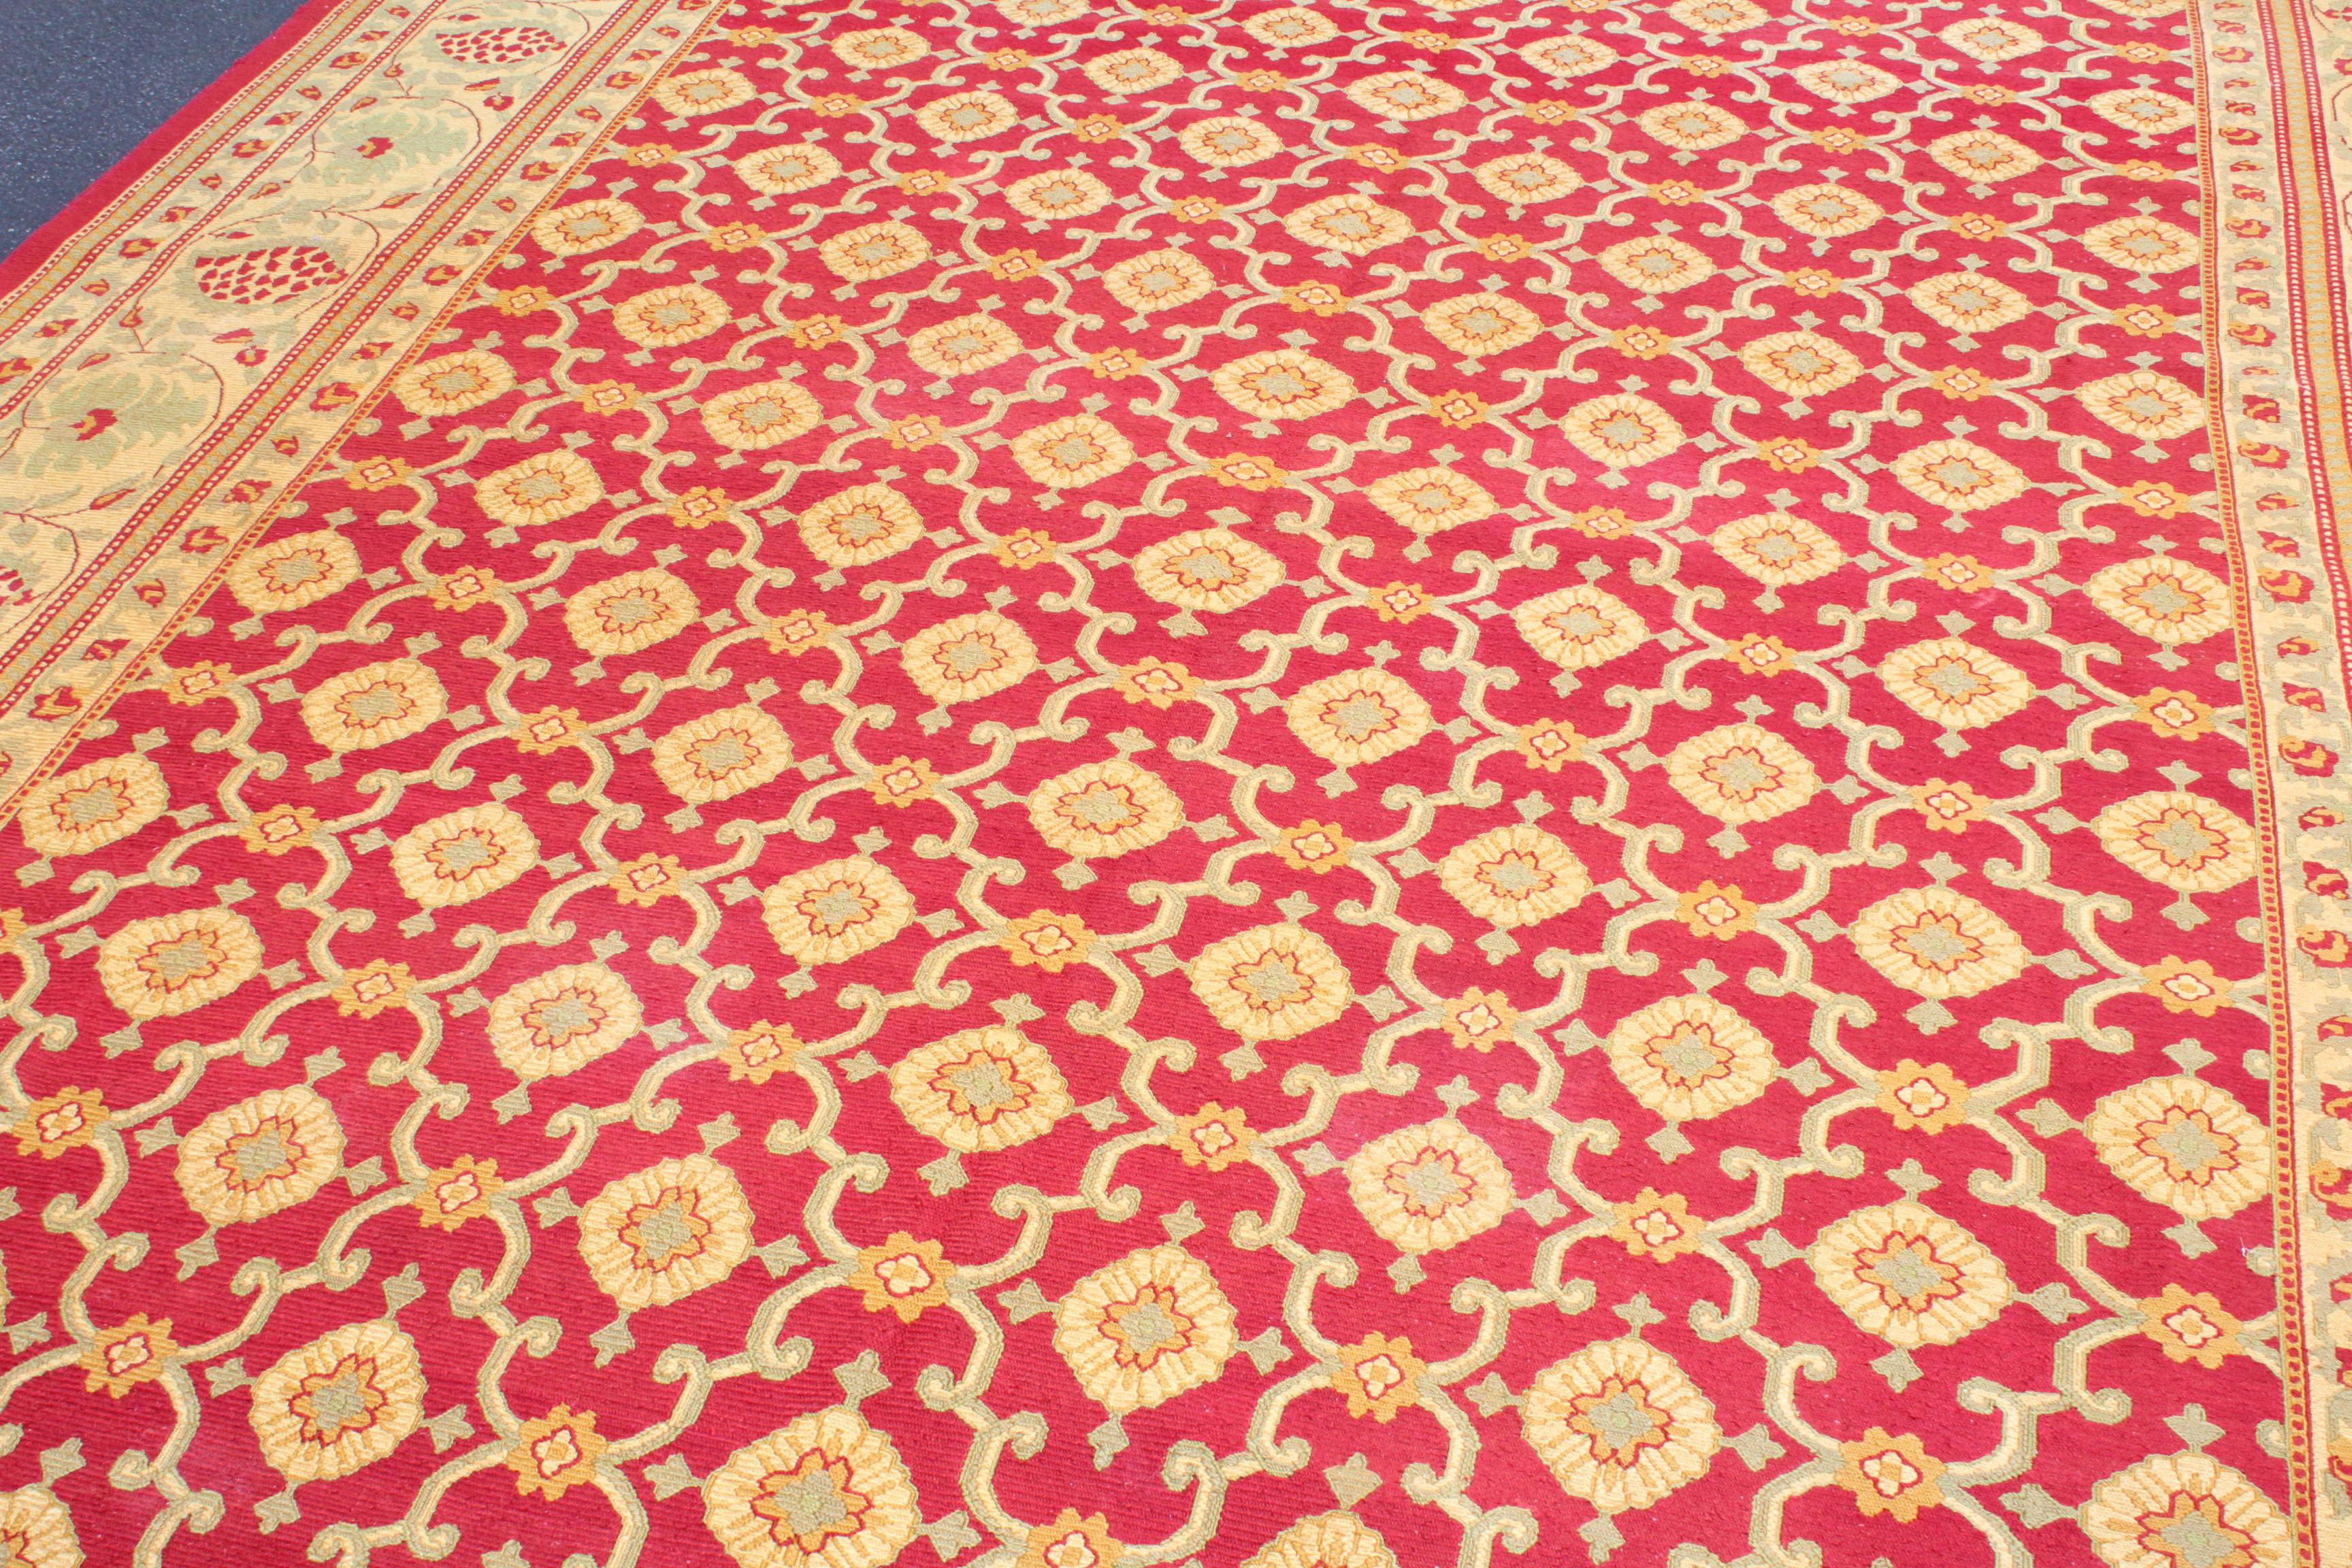 Wool 1940s Art Deco Oversize Rug from India